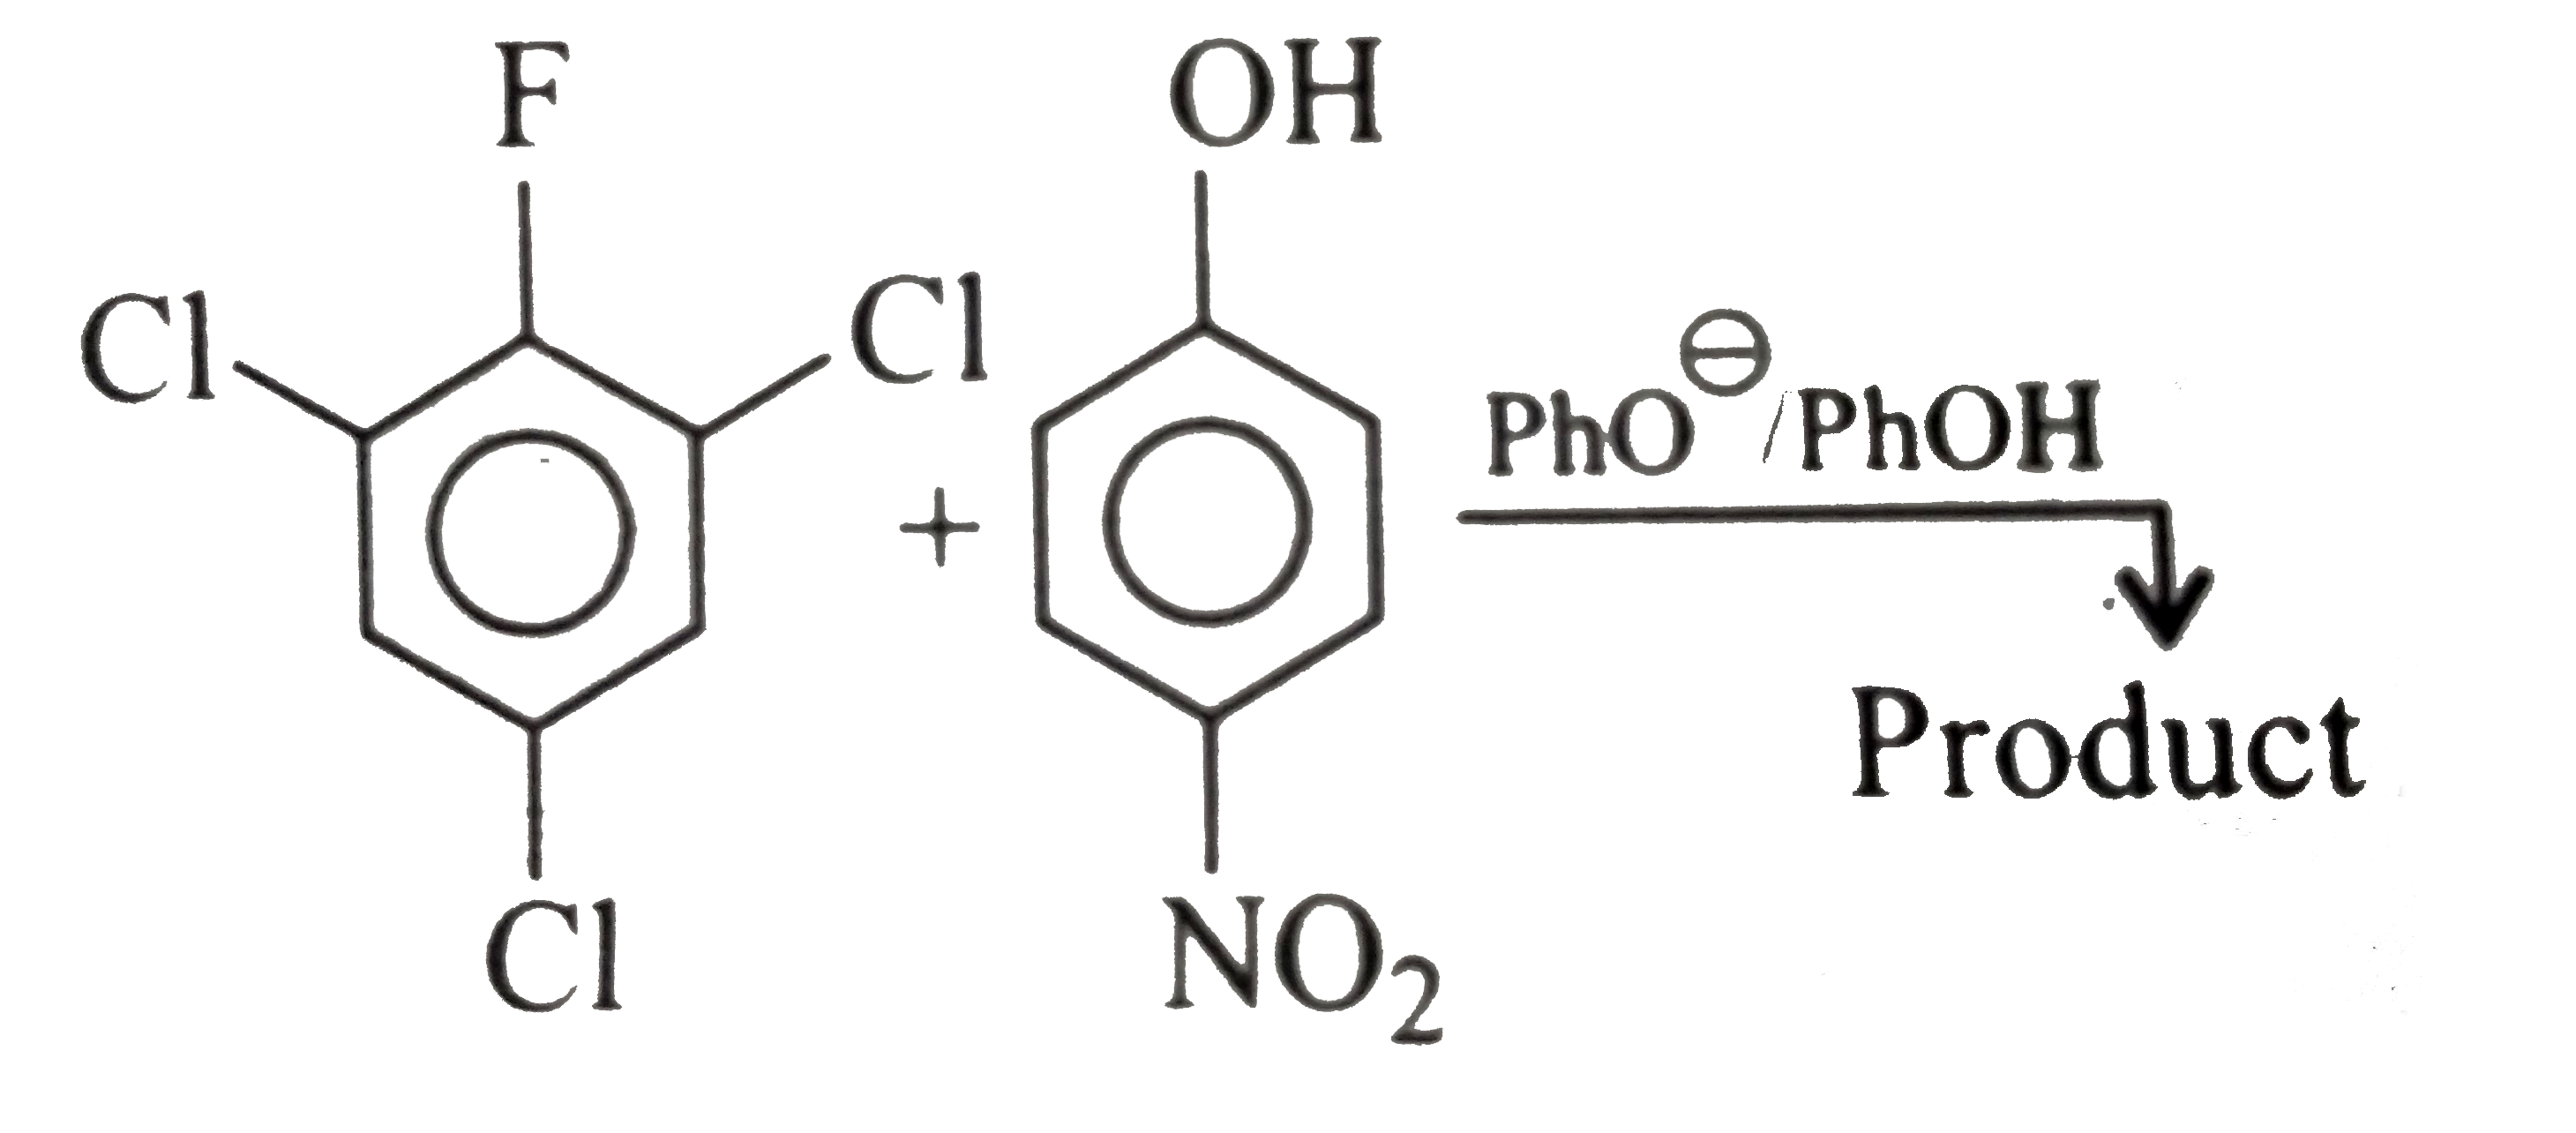 Assertion (A):    The product is:    Reason (R ): p-NO(2)-C(6)H(4)O^(-) is a stronger nucleophile than PhO^(-).